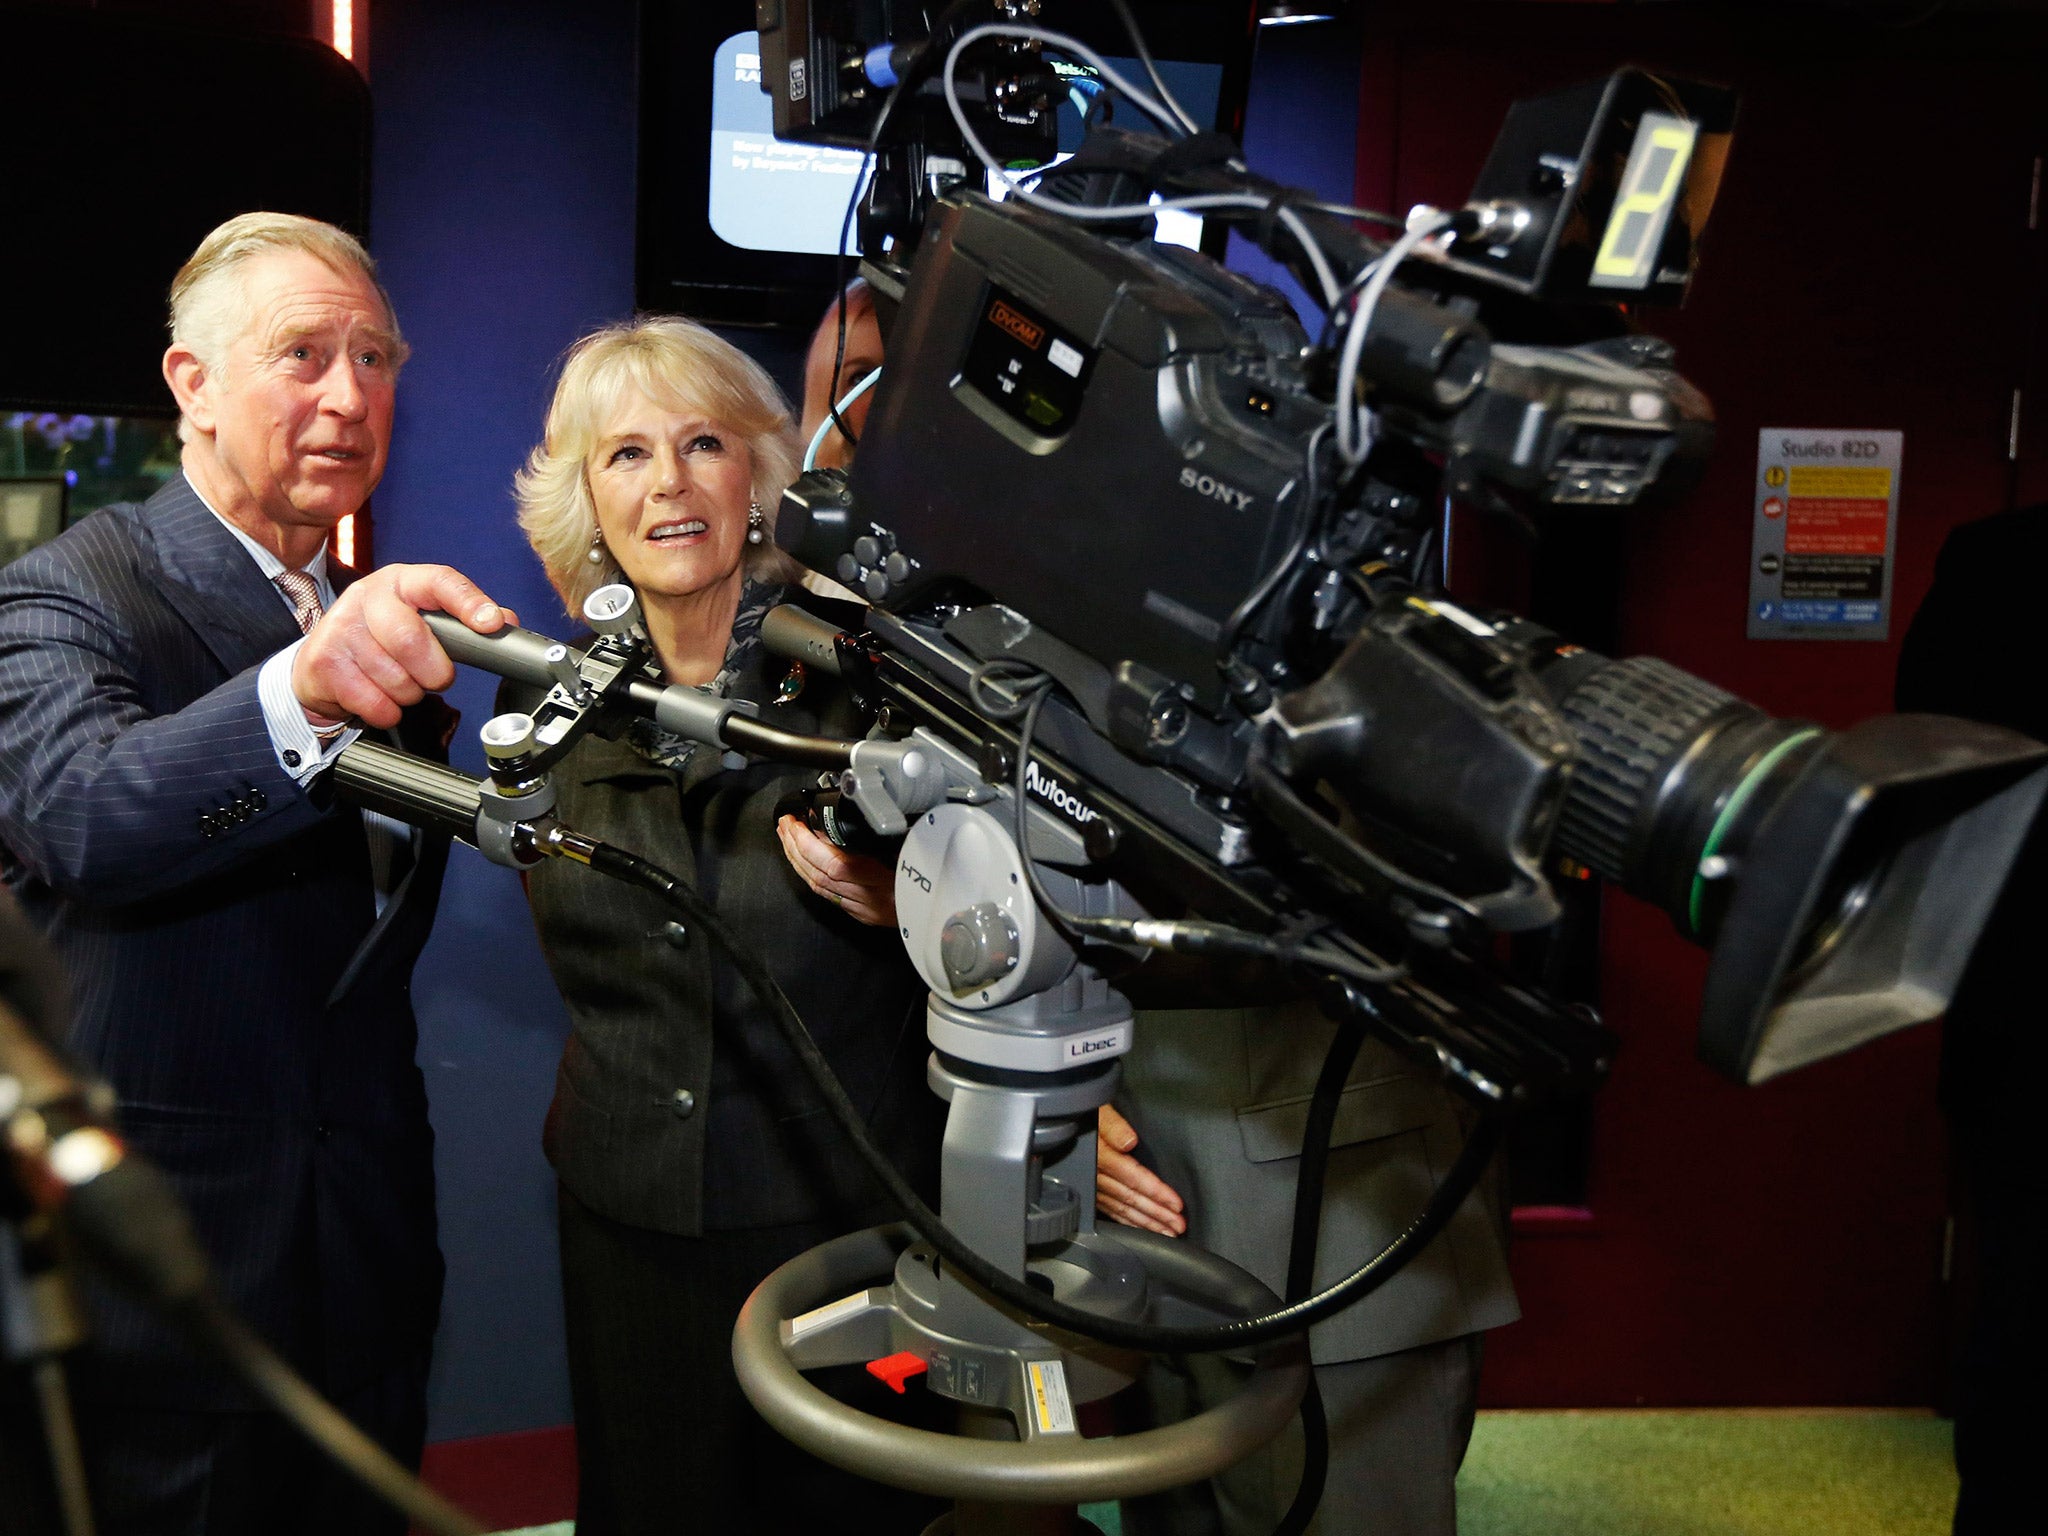 Prince Charles and Camilla during a visit to the BBC last year